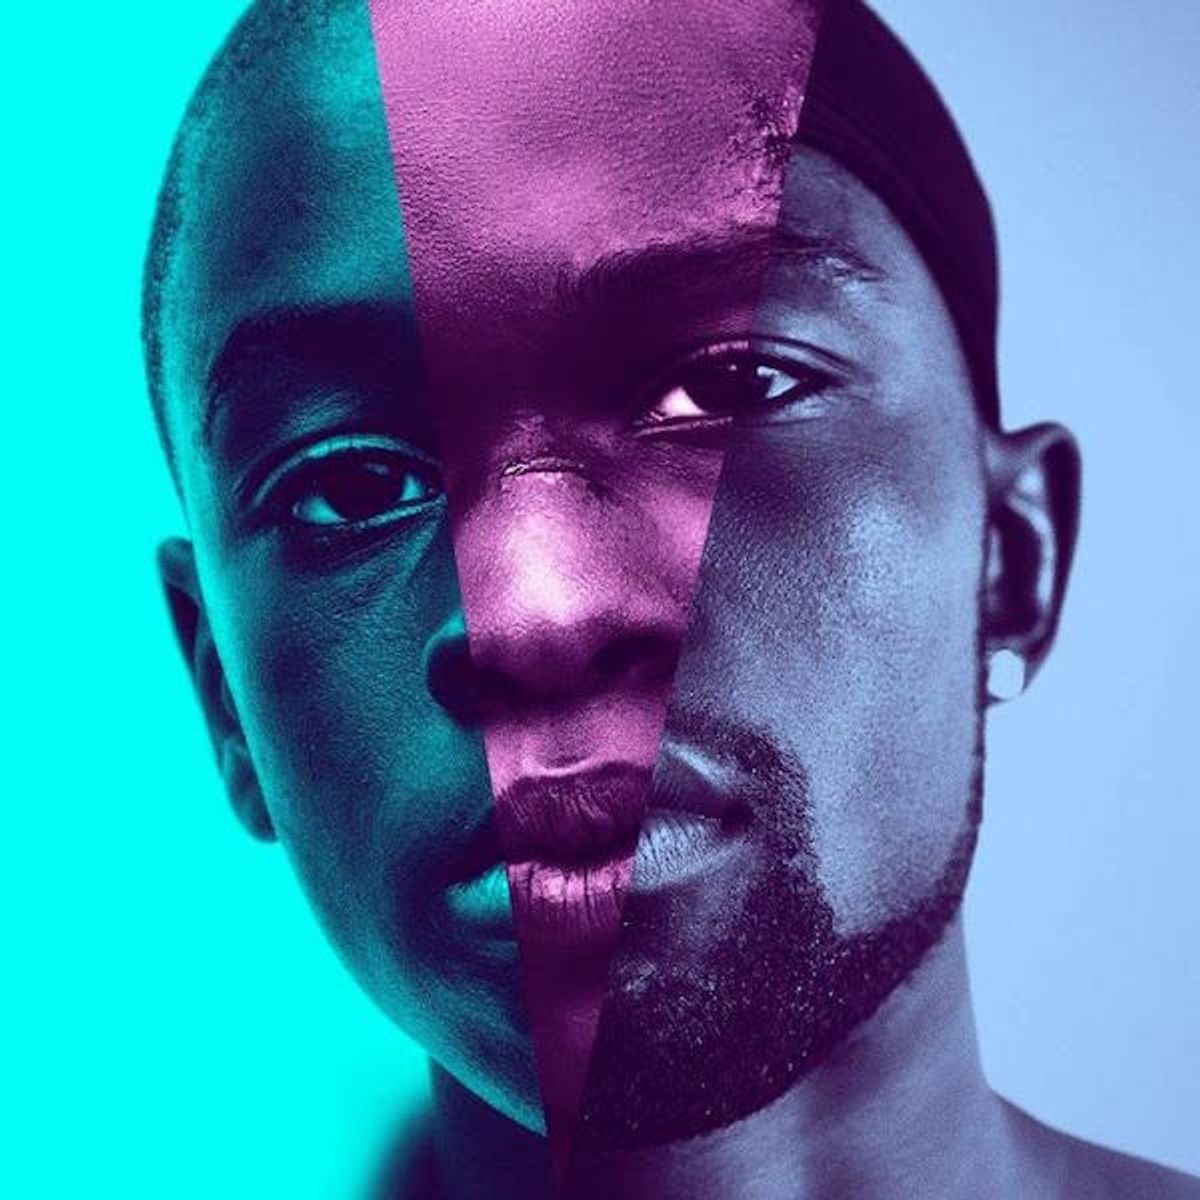 Moonlight: A Cinematic Examination of Black Masculinity